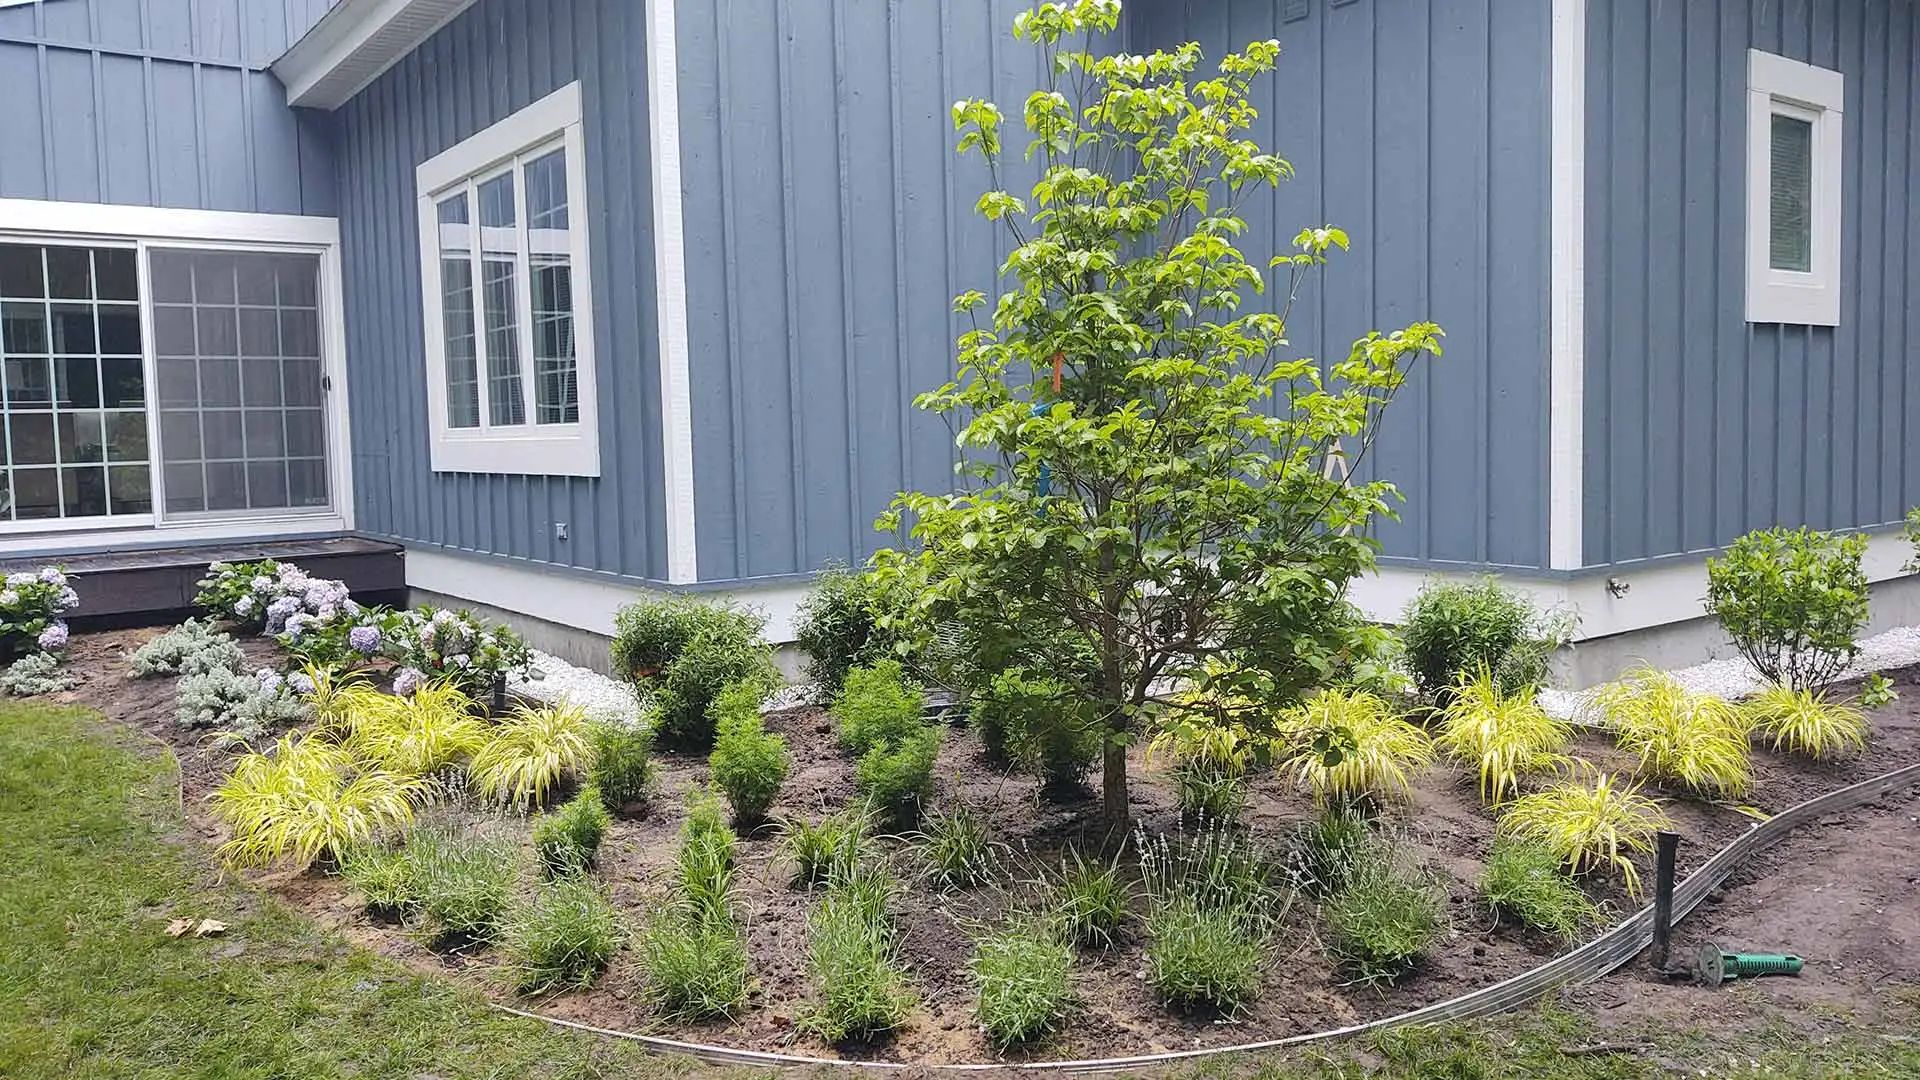 Want to Add New Plants in Your Landscape Beds? Consider These 3 Things